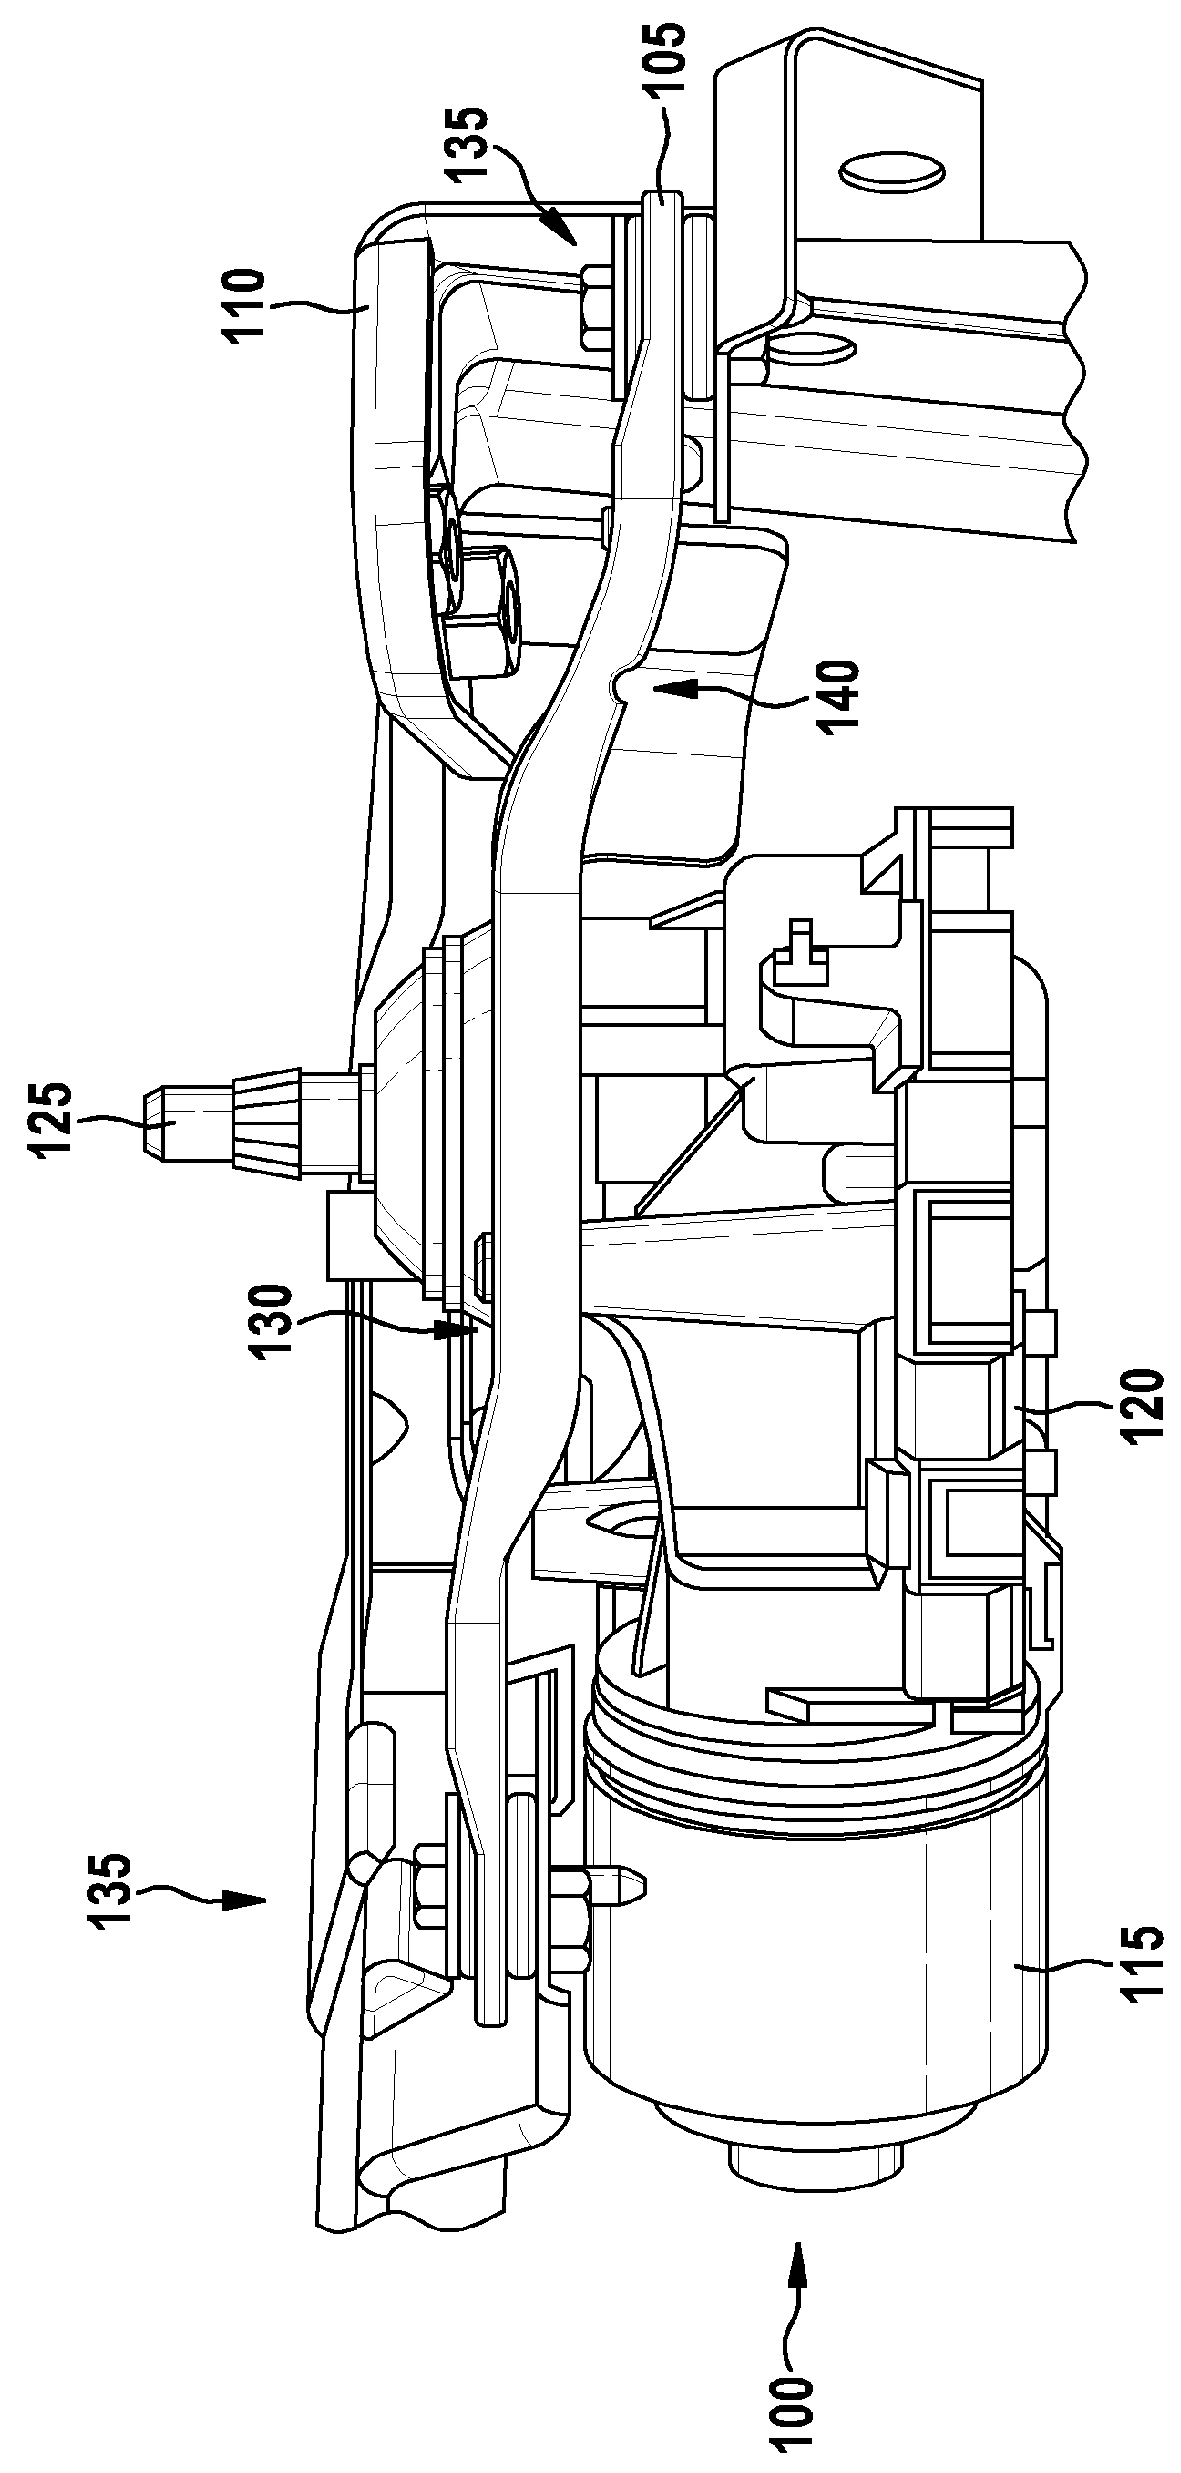 Support element for a wiper drive